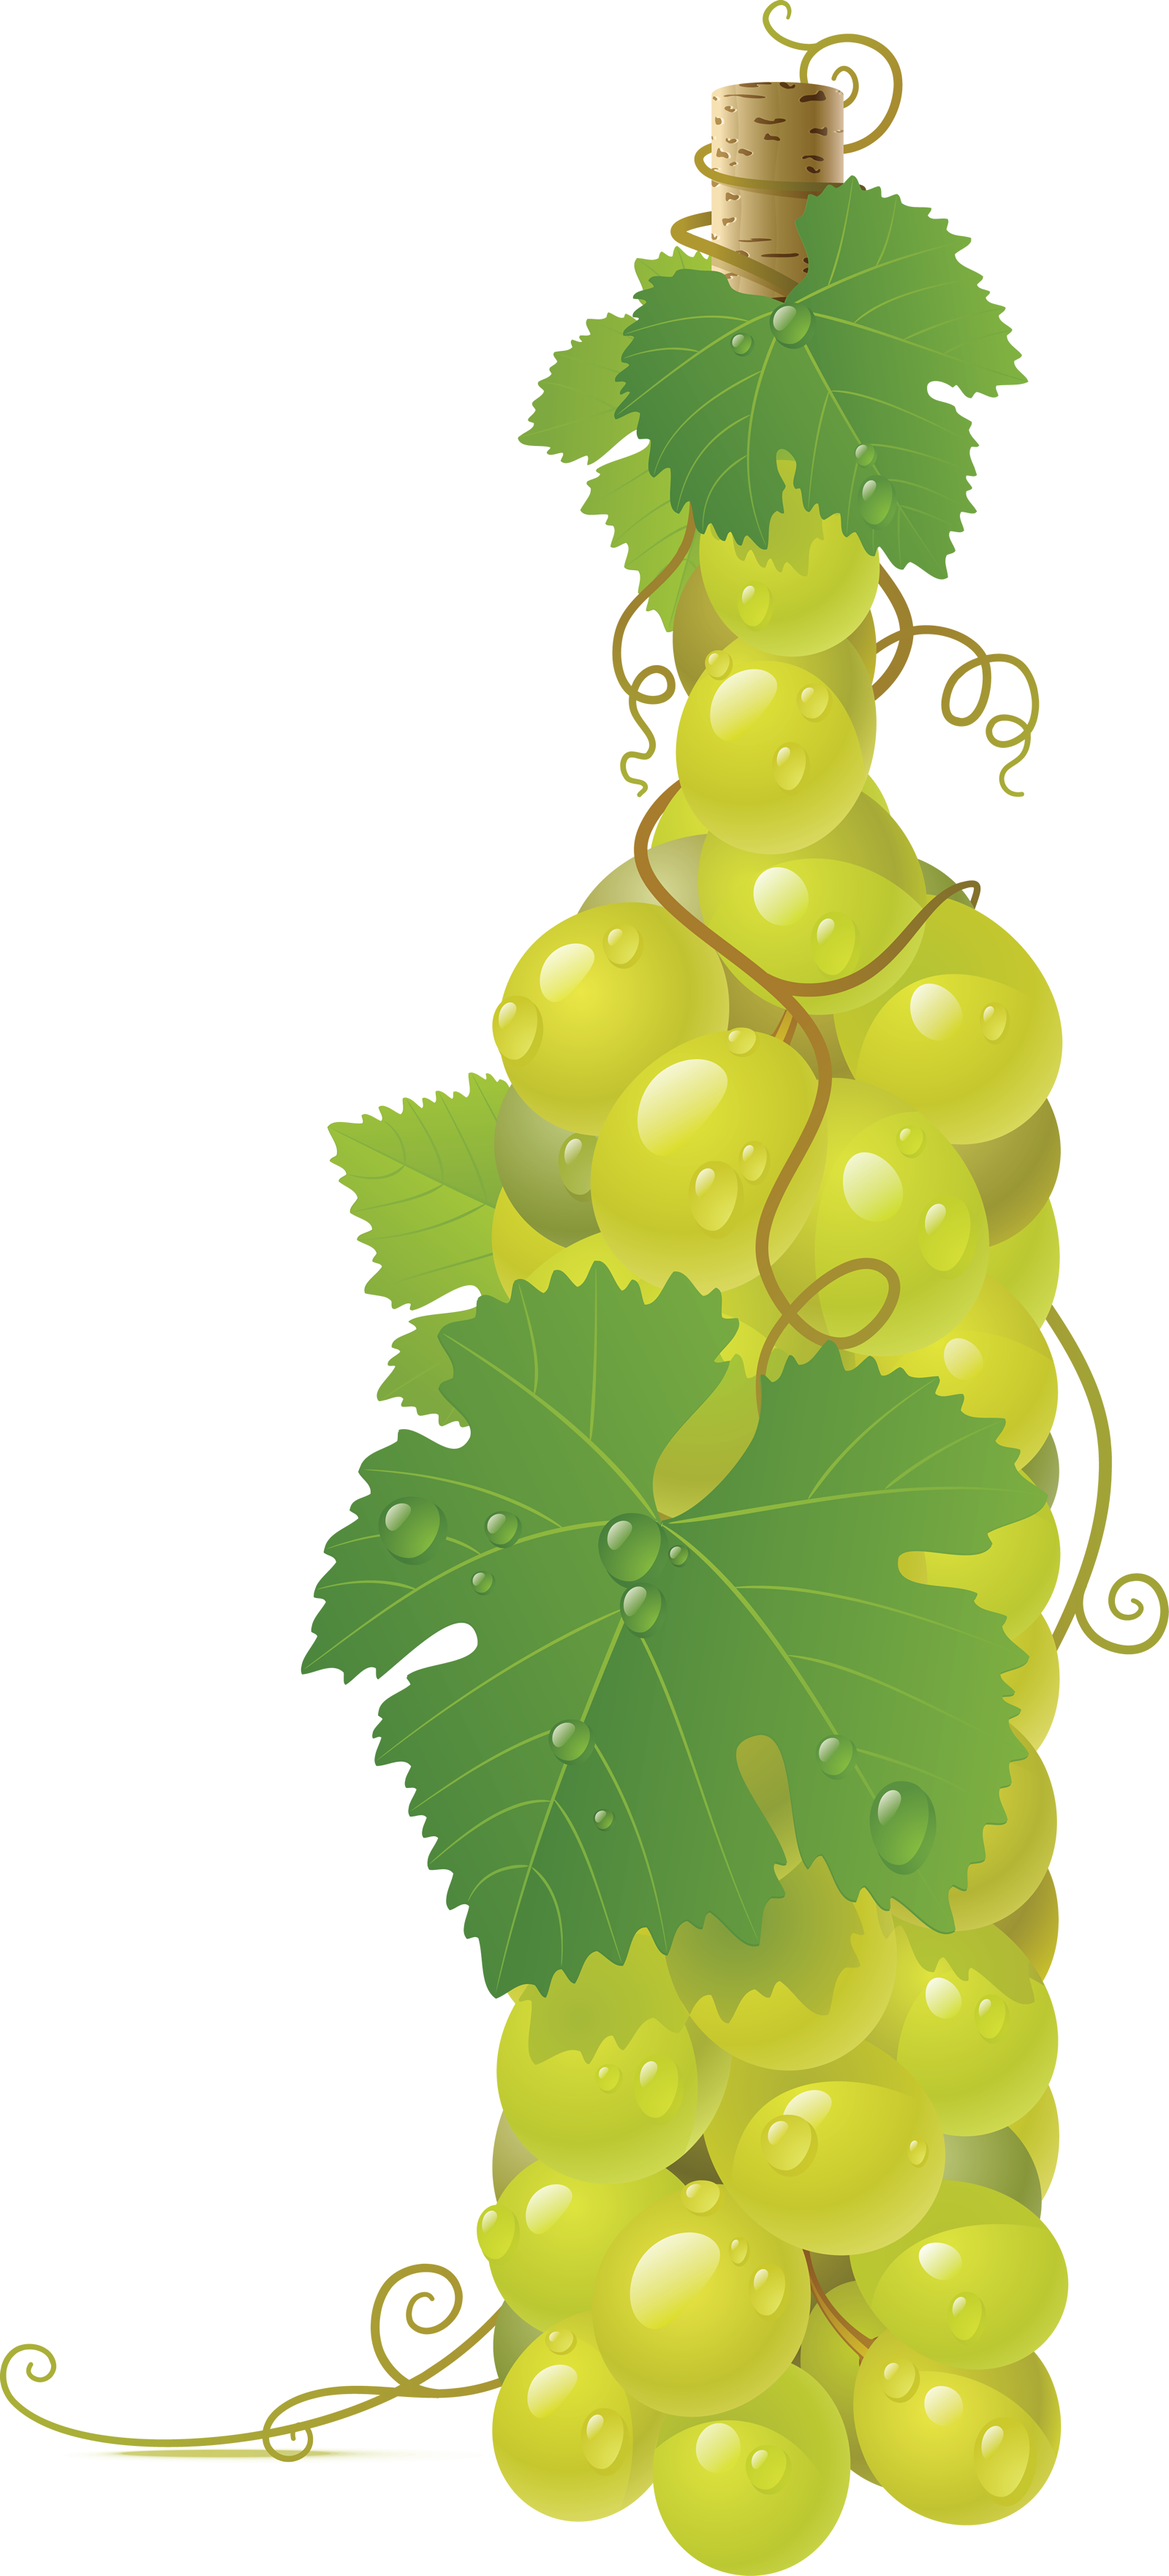 Winebottle out of Grapes